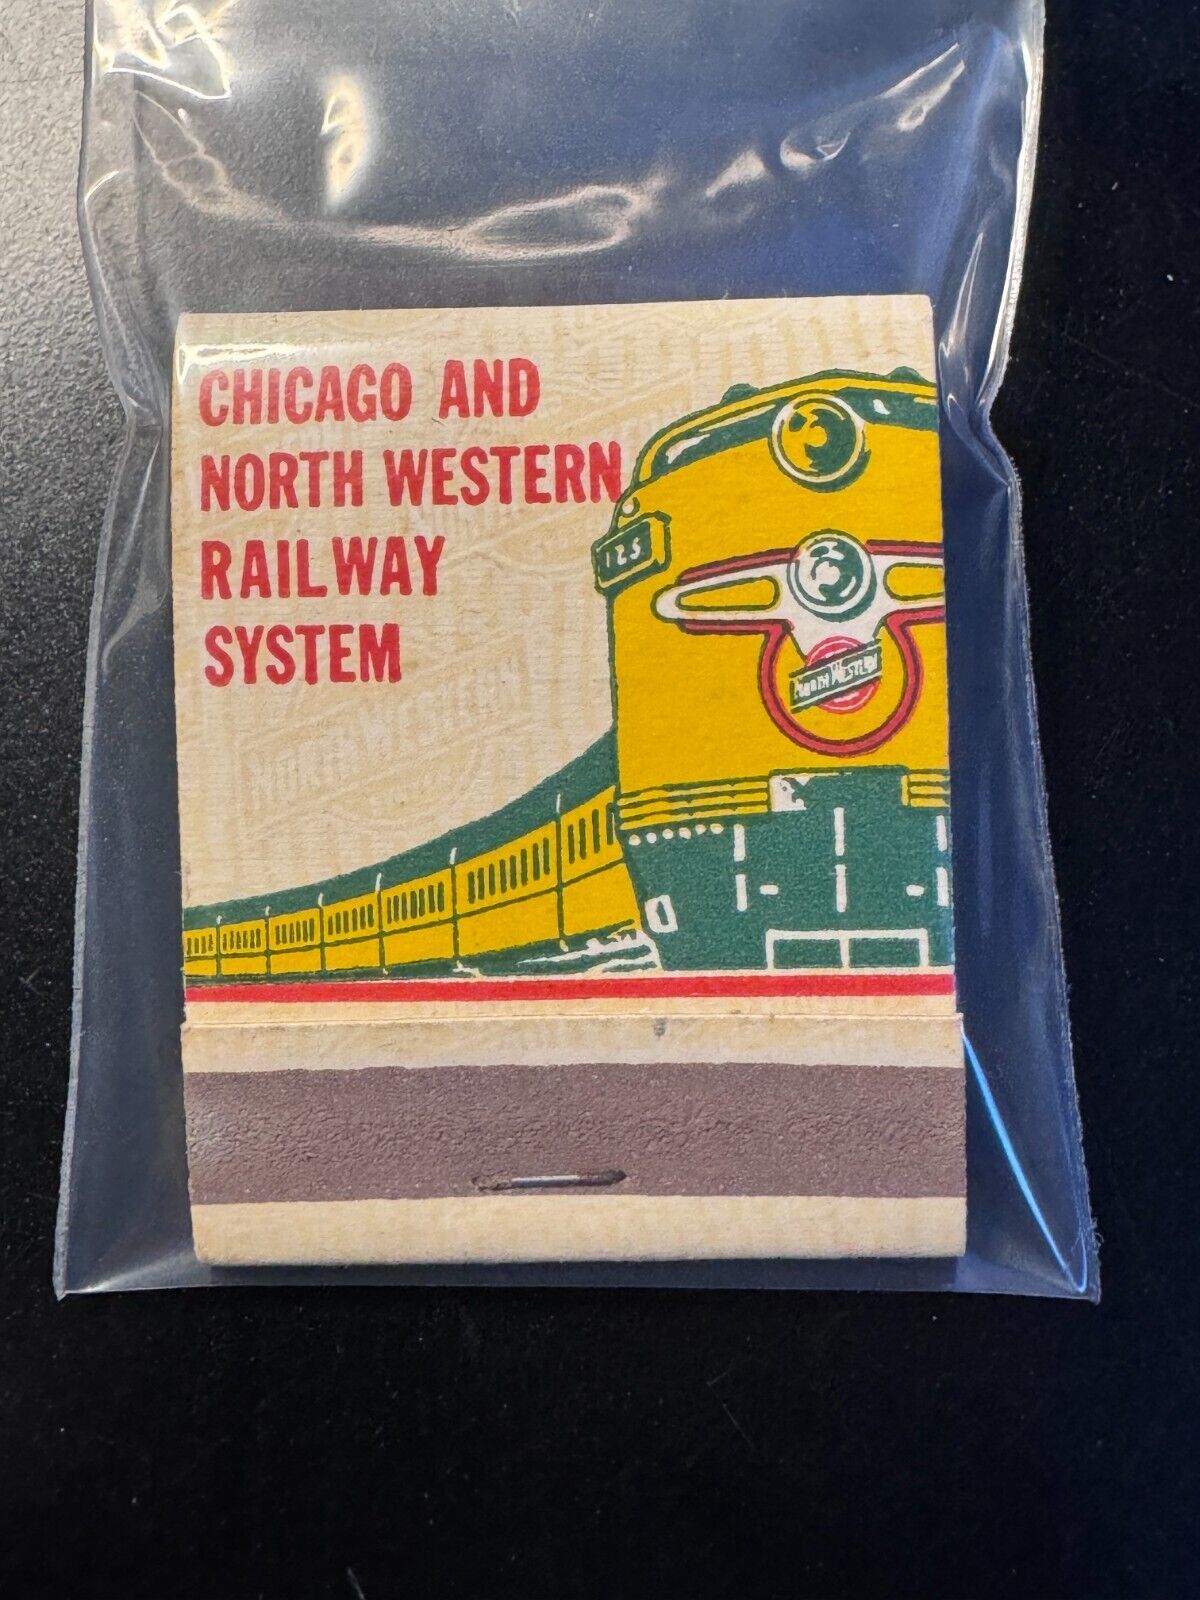 MATCHBOOK - CHICAGO AND NORTH WESTERN RAILWAY SYSTEM - UNSTRUCK BEAUTY